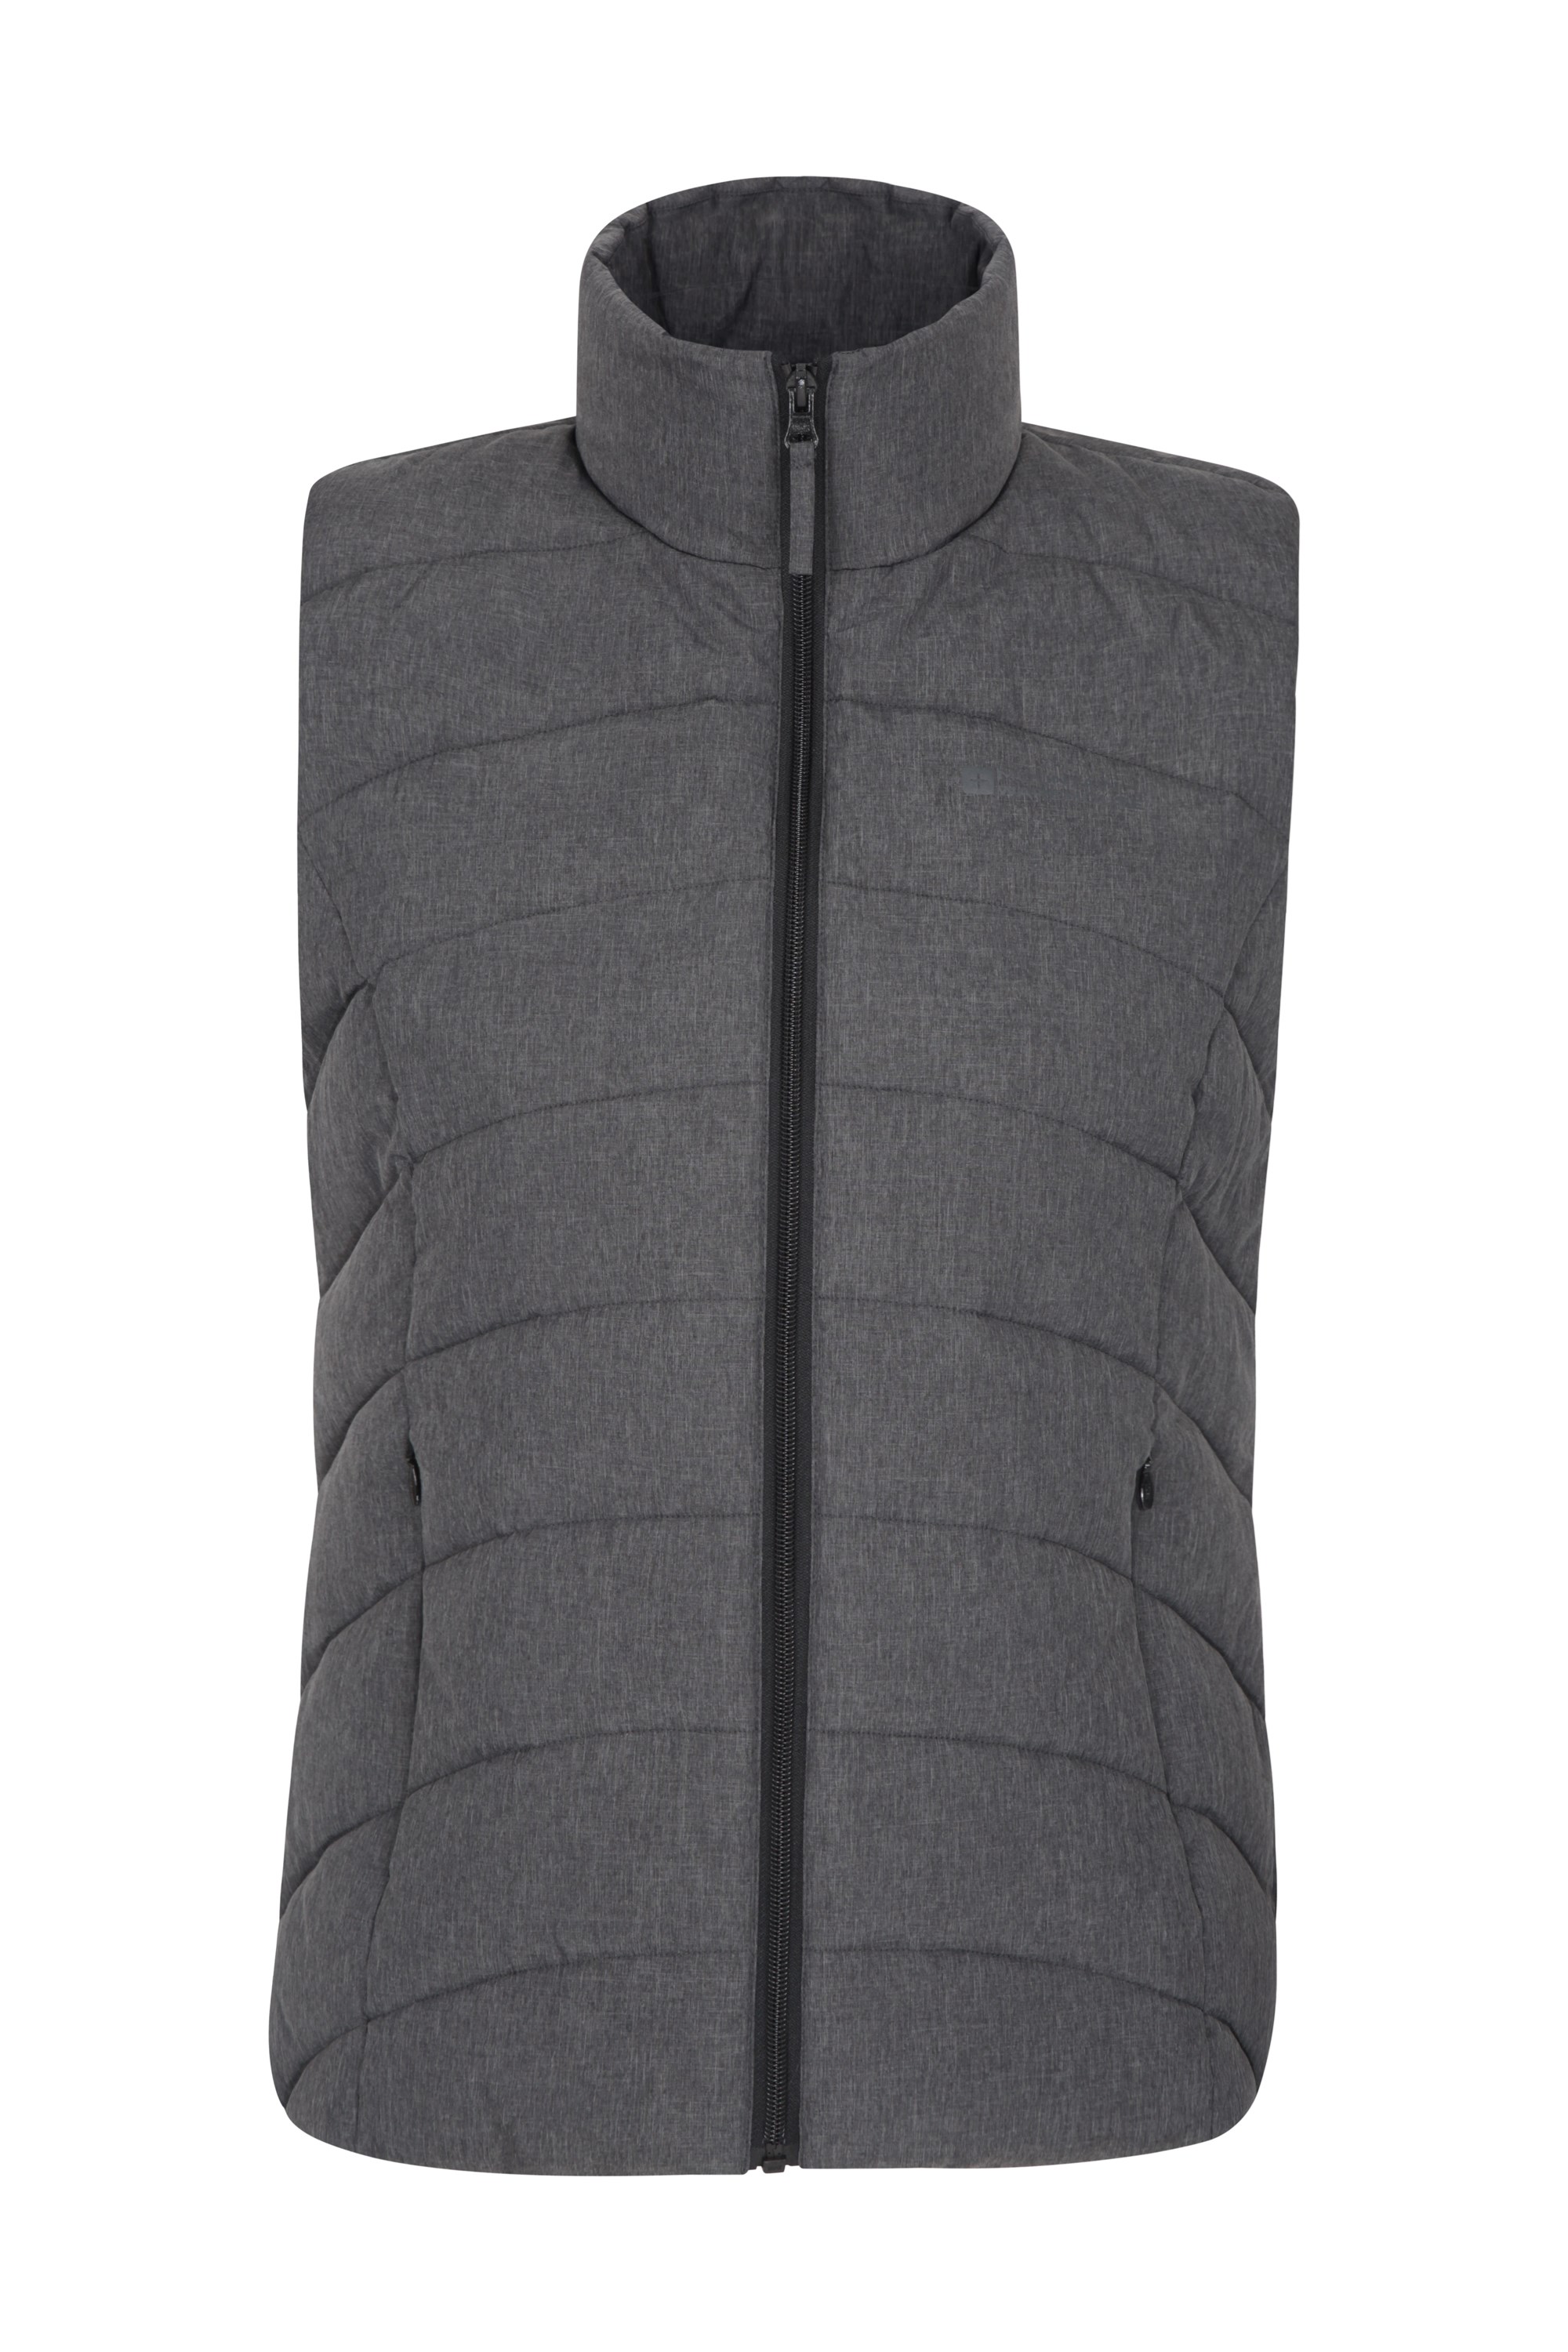 Opal Womens Insulated Vest - Grey